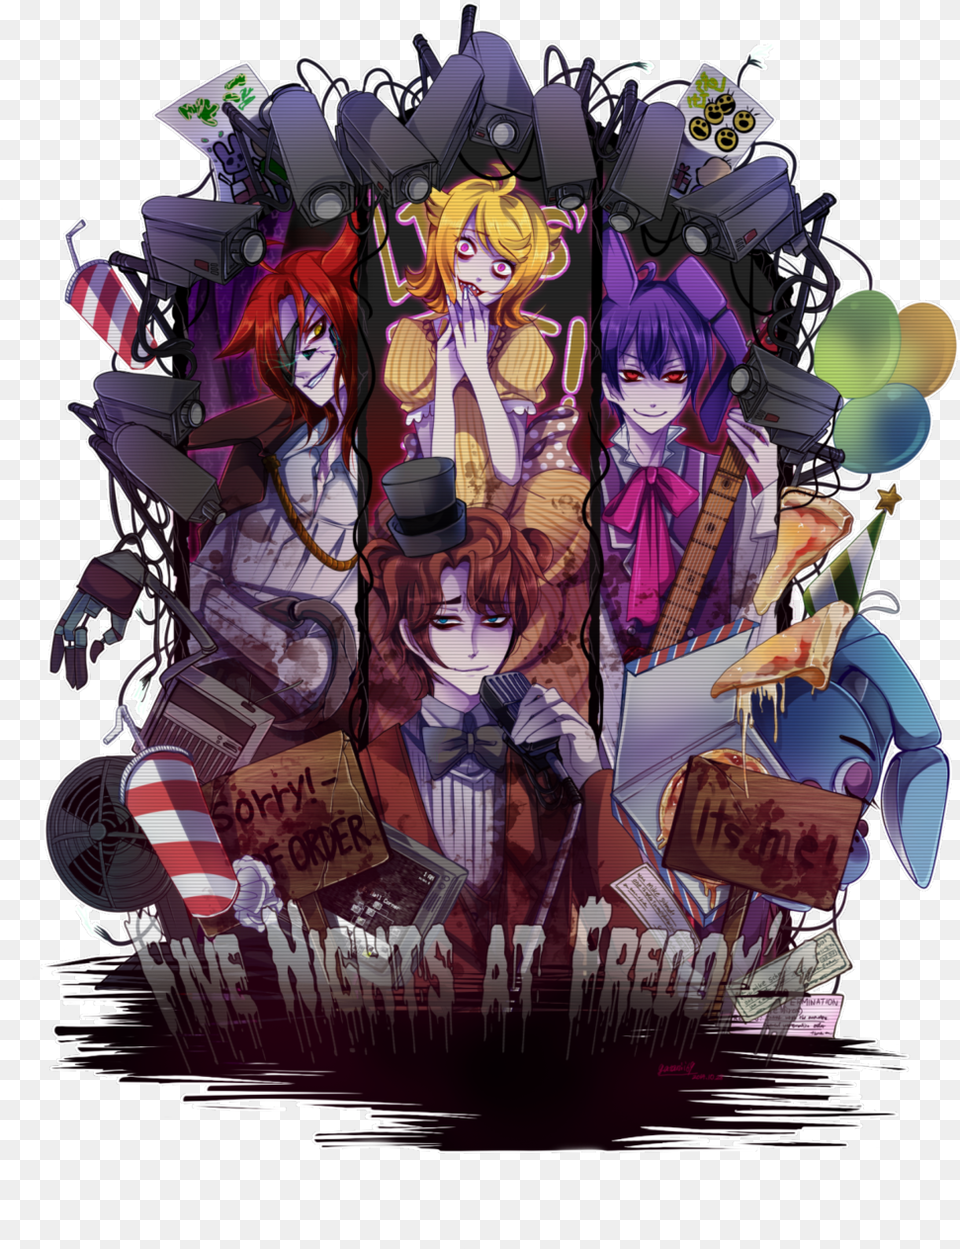 Five Nights At Freddy S Anime And Bonnie Anime Five Nights At Freddy39s Fan Art, Publication, Book, Comics, Person Png